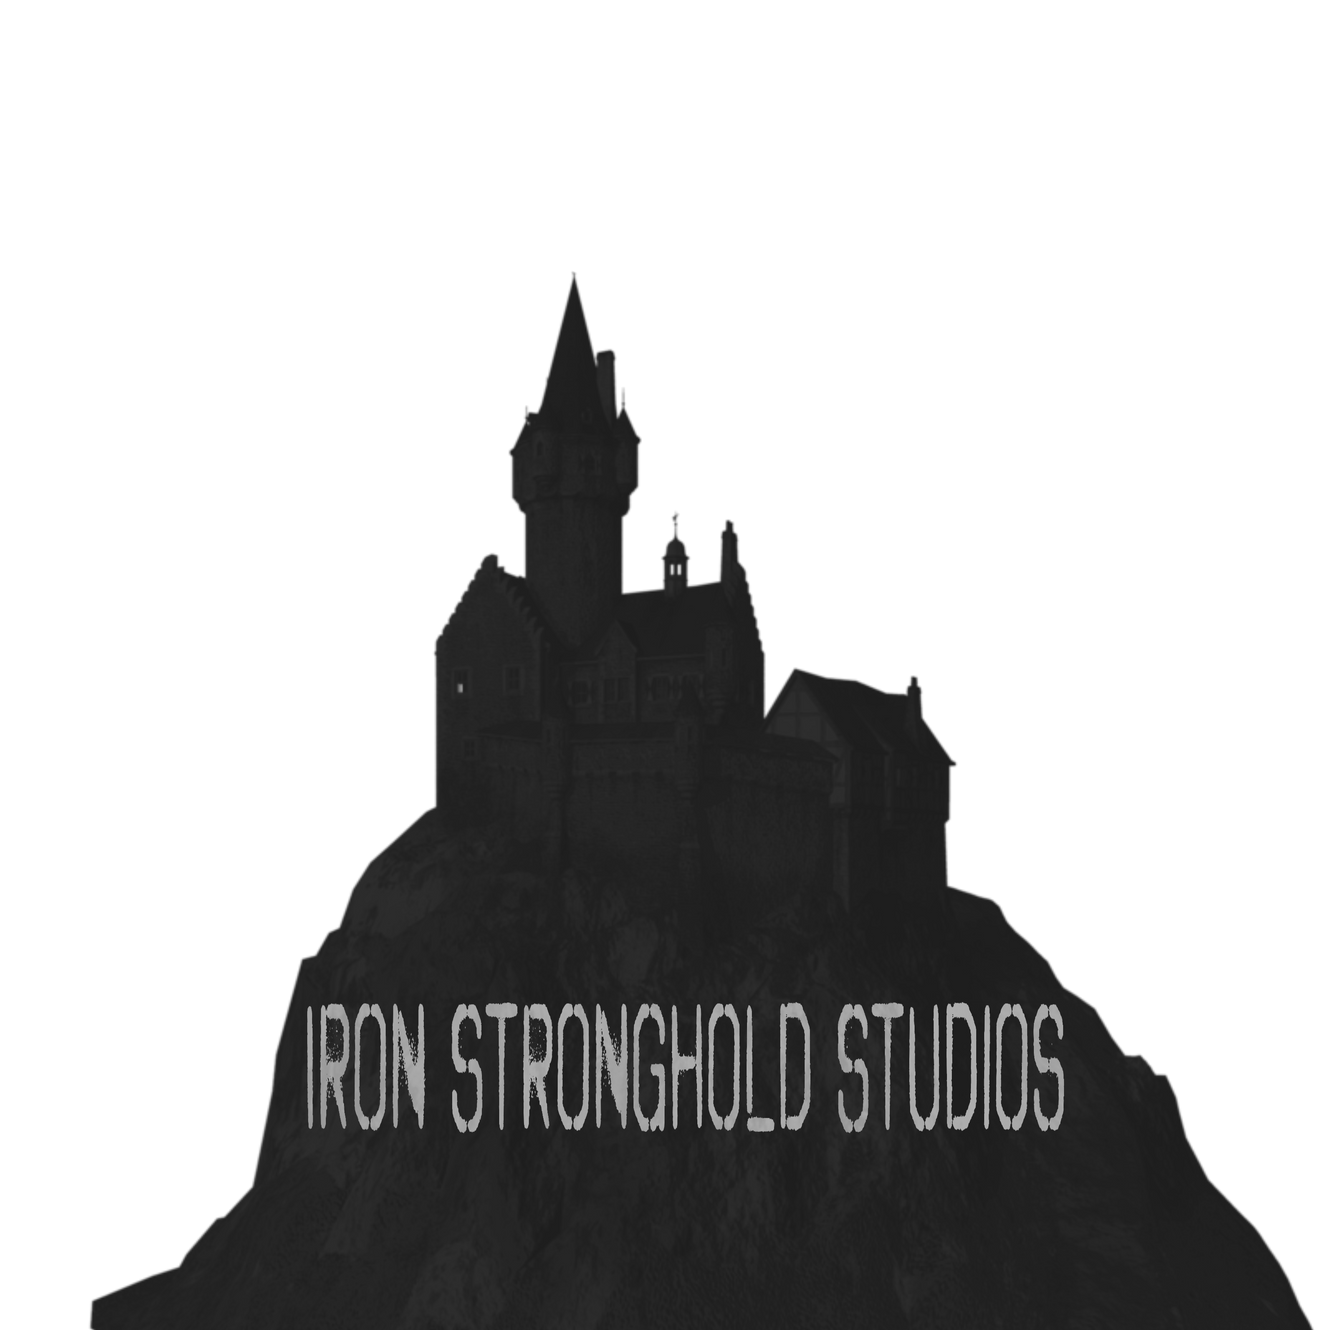 www.ironstrongholdproductions.com